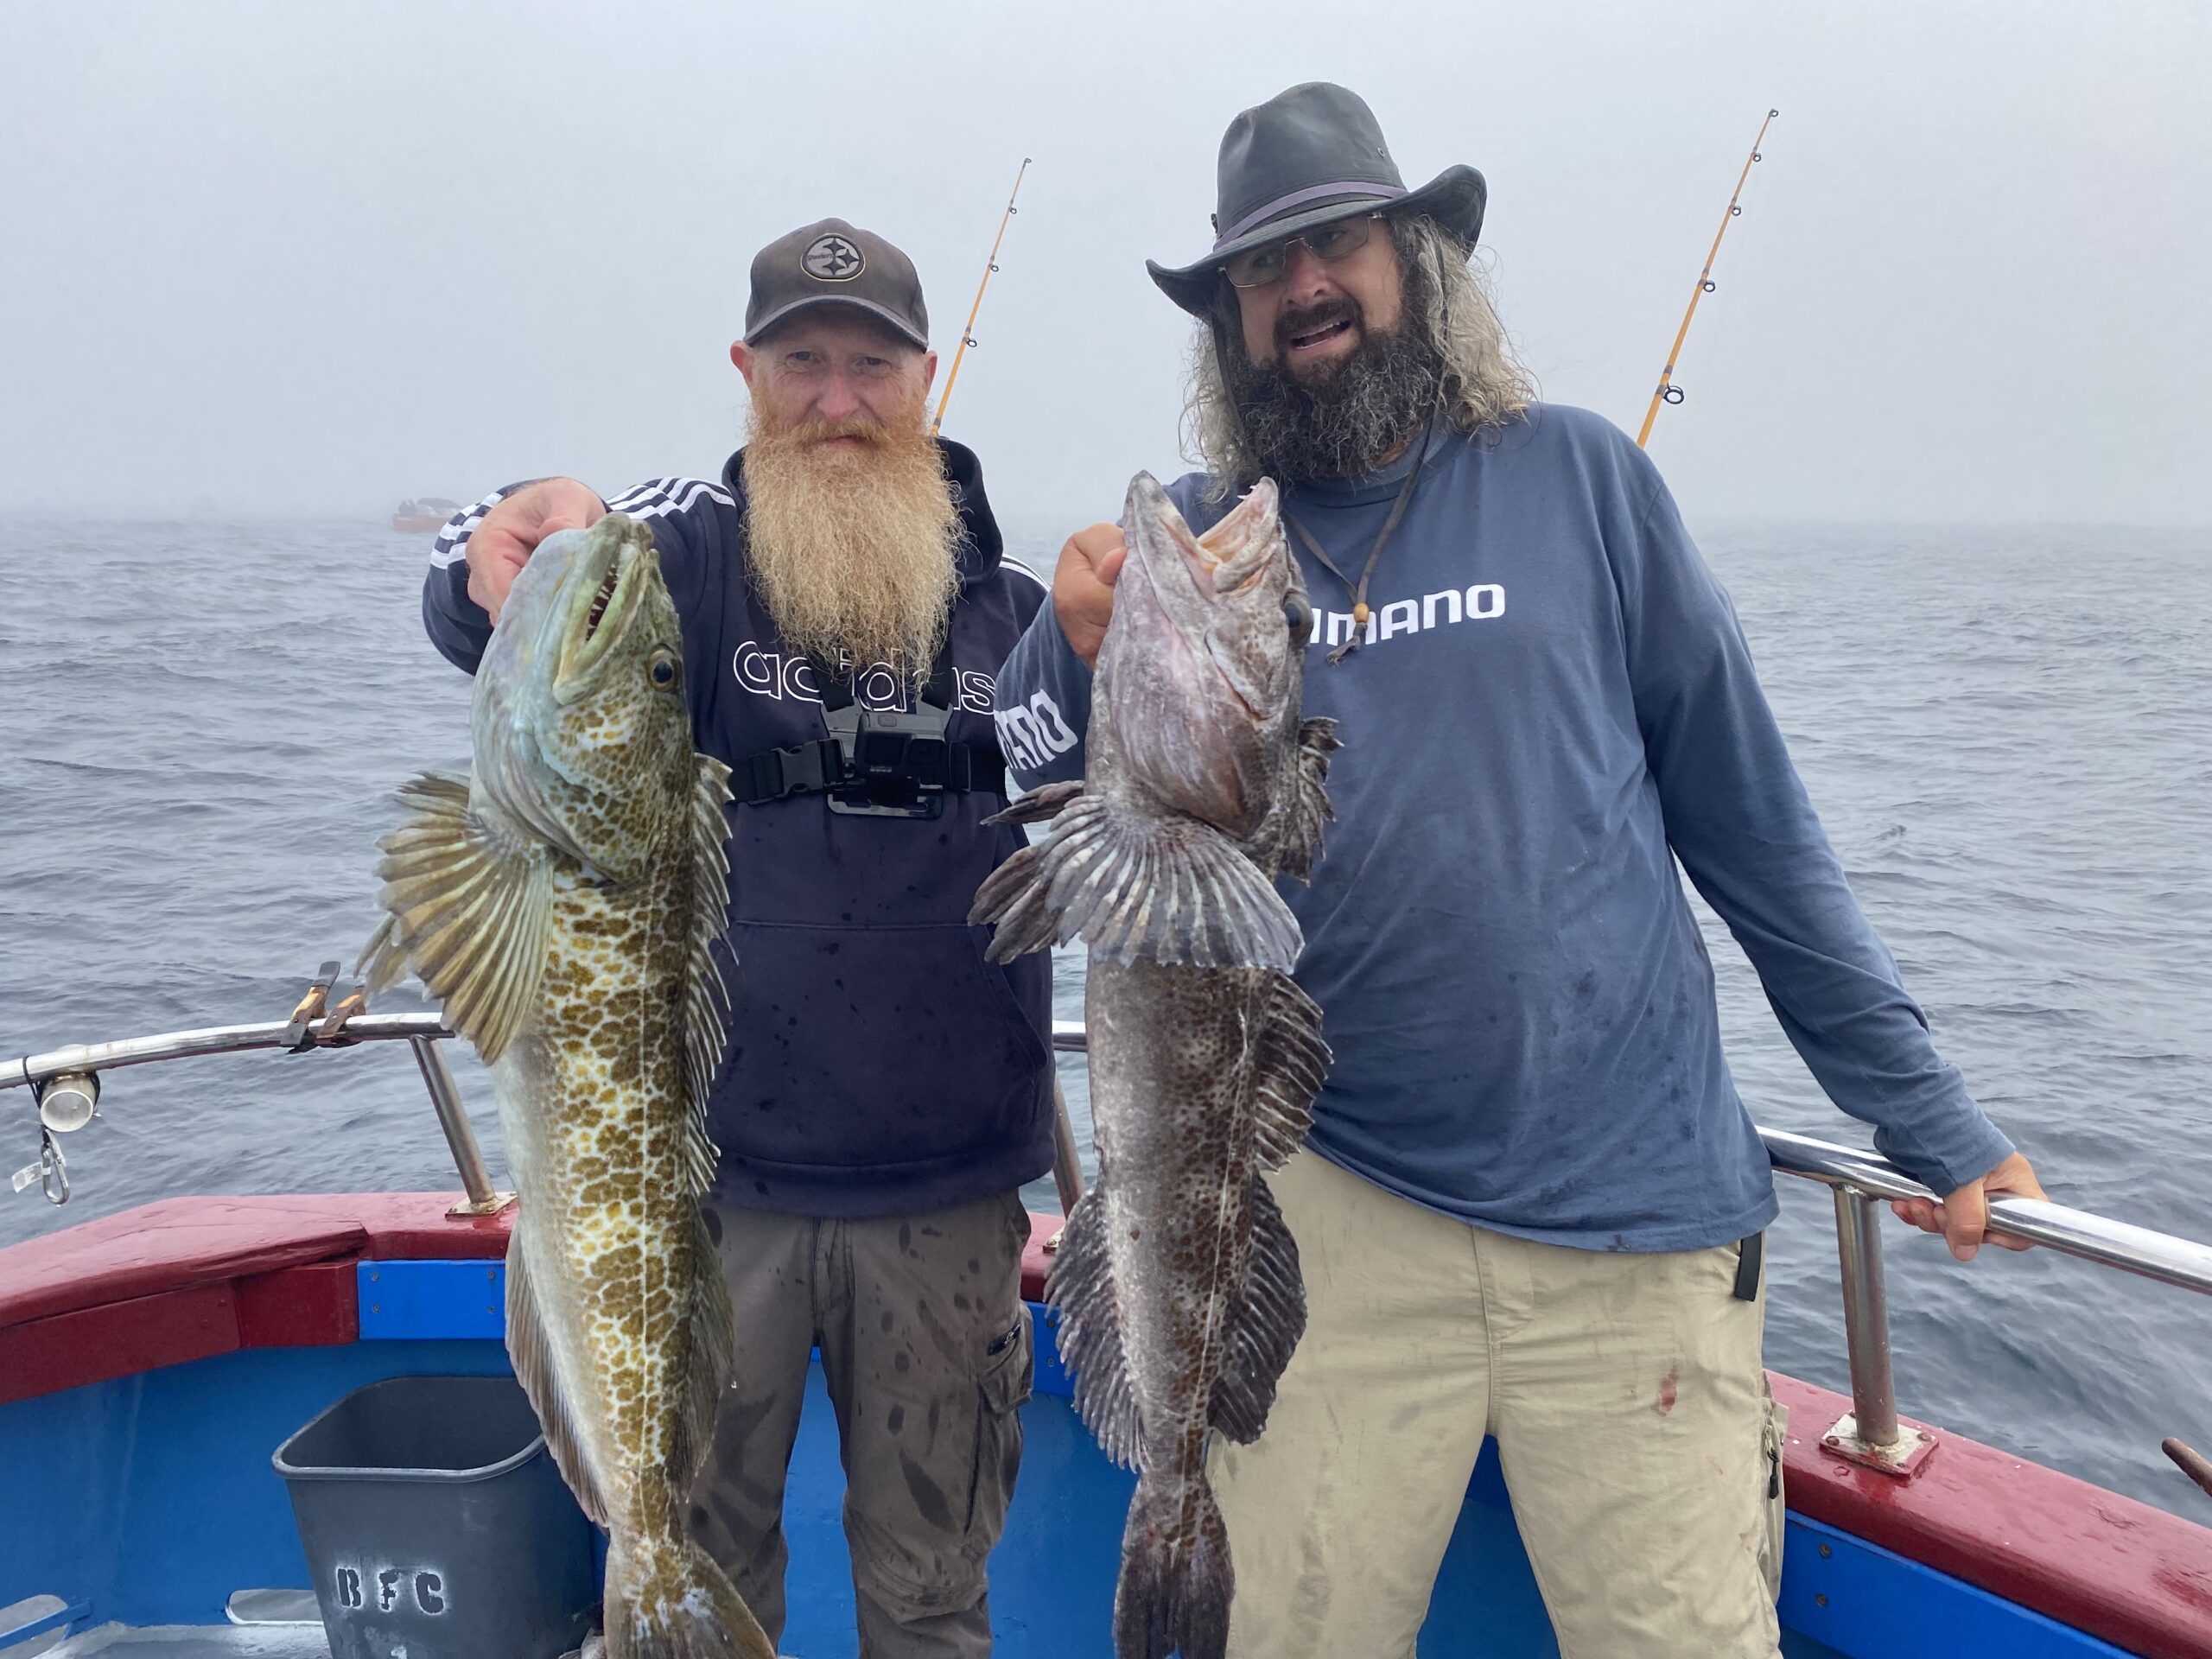 Winter Saltwater Fishing: How to Fish for Cod, Tautog, and Ling in